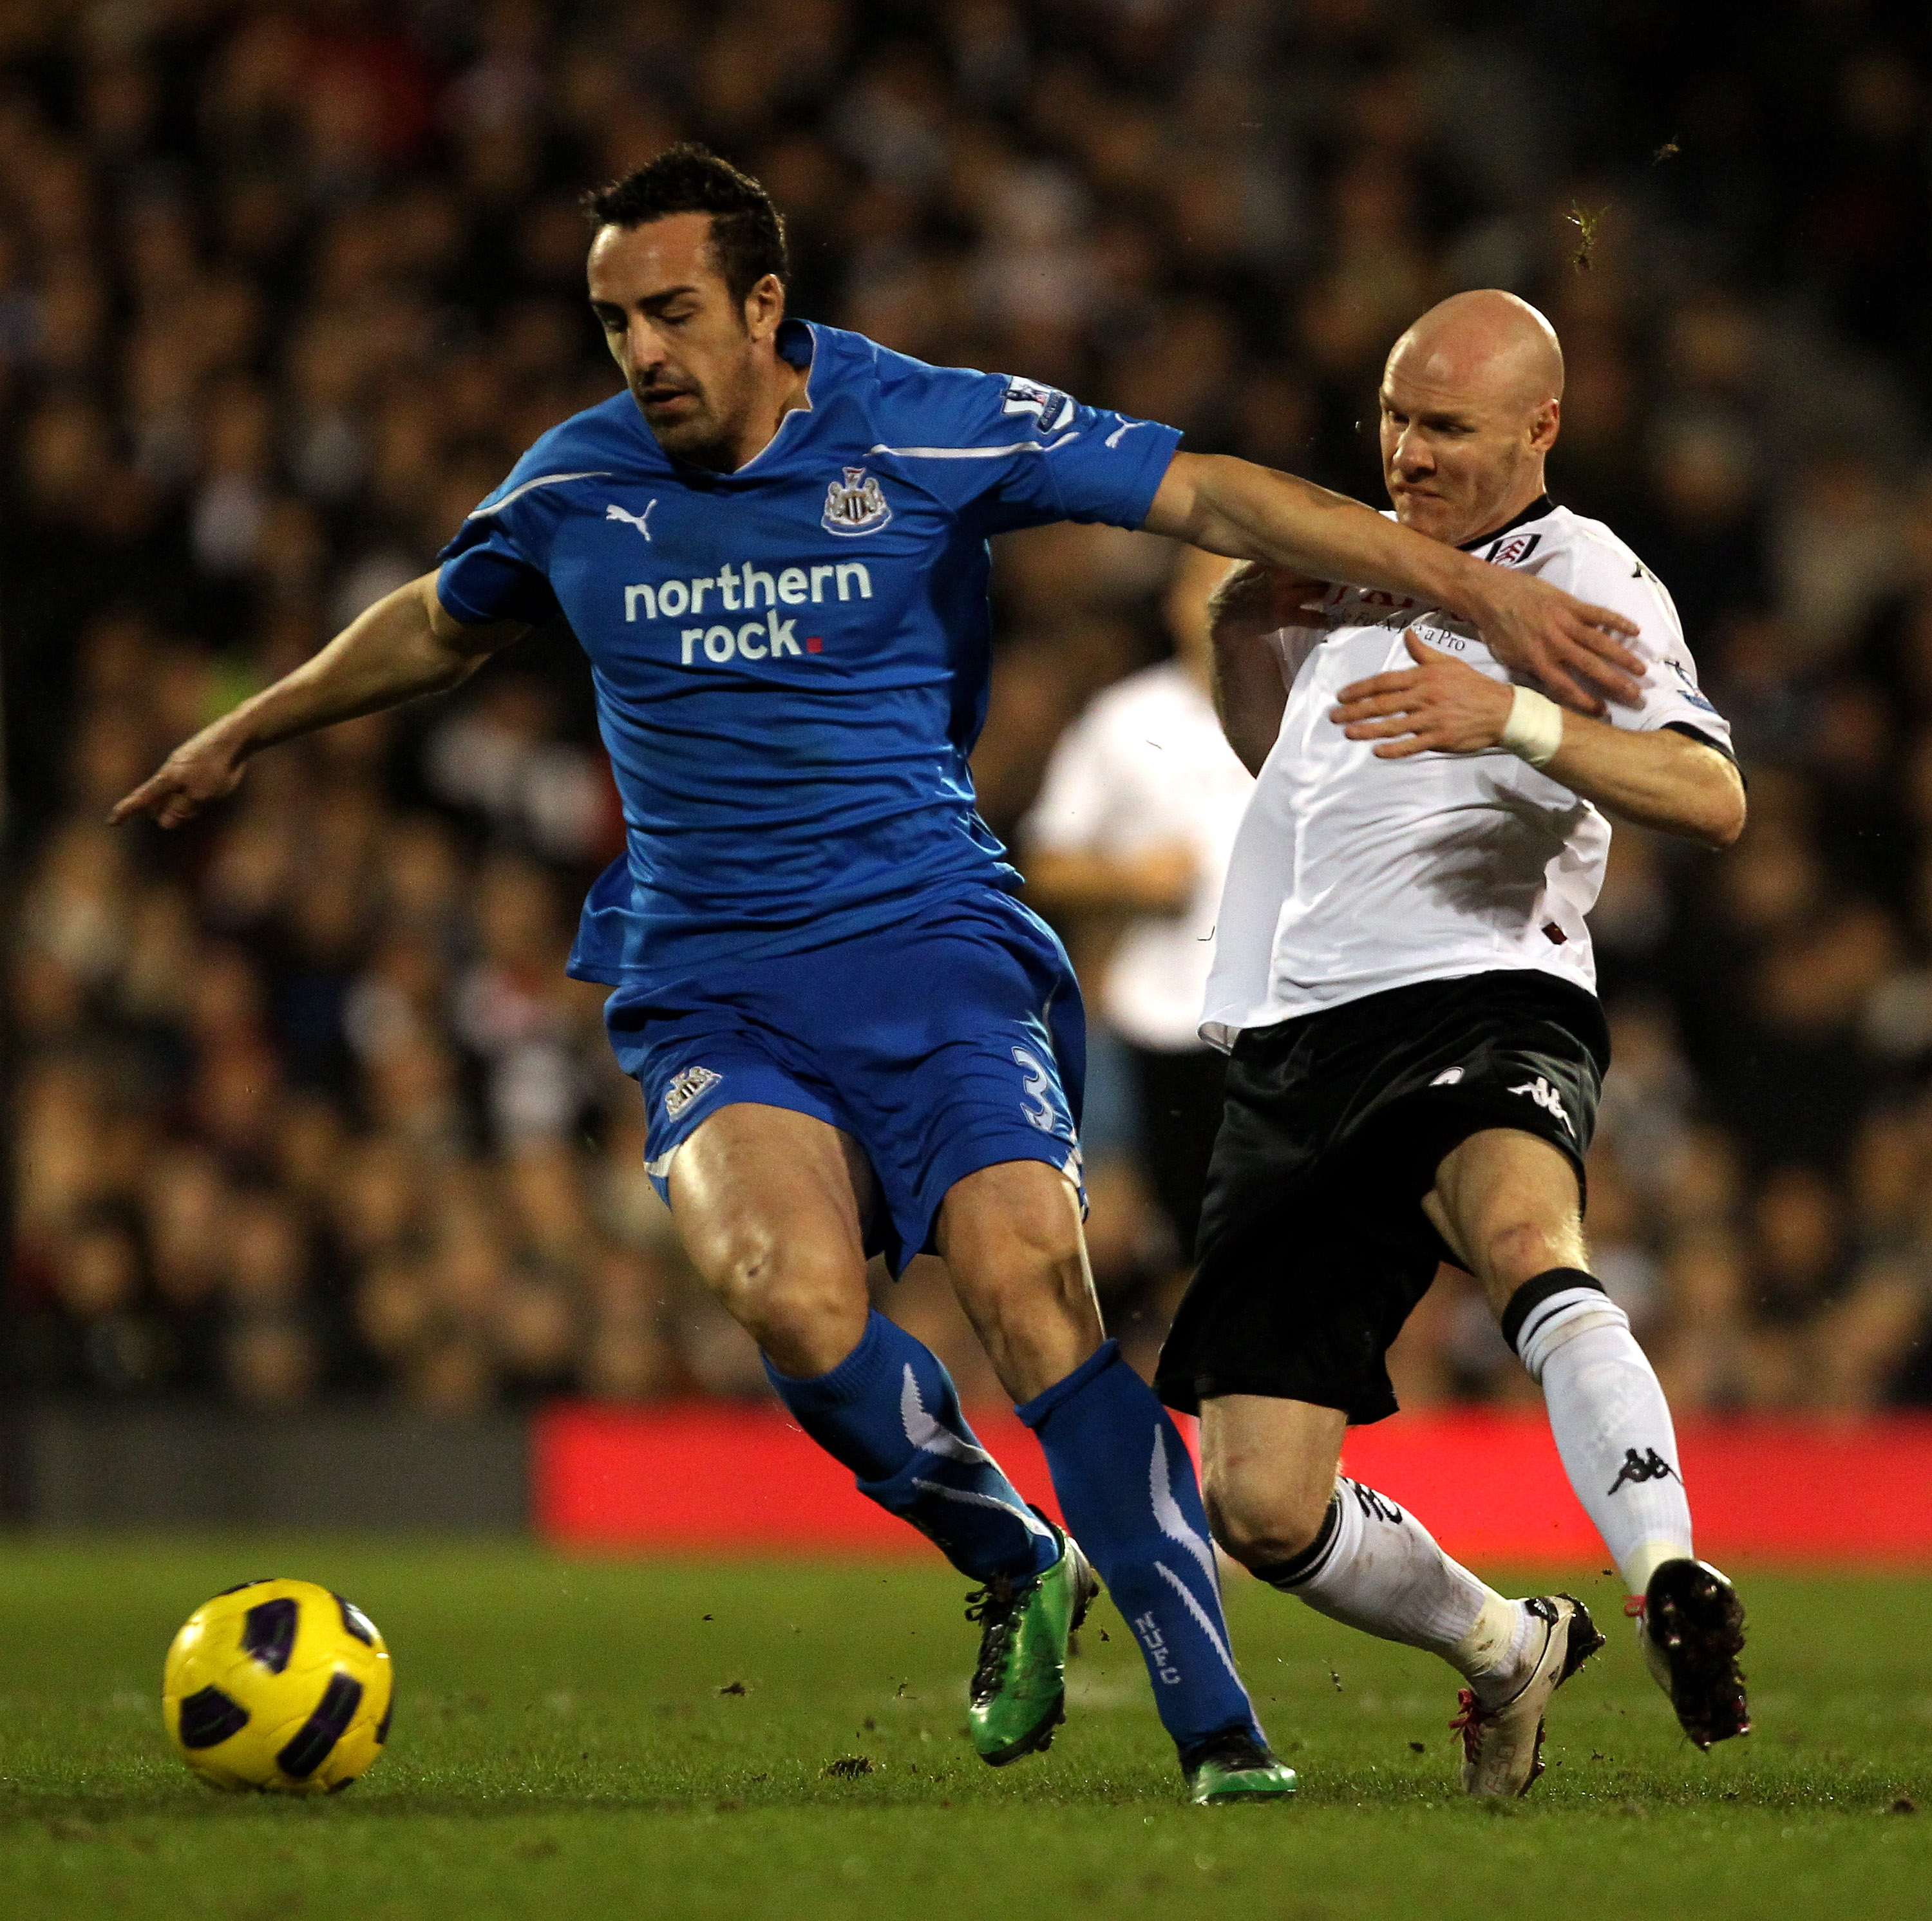 LONDON, ENGLAND - FEBRUARY 02:  Jose Enrique Sanchez (L) of Newcastle battles with Andrew Johnson of Fulham during the Barclays Premier League match between Fulham and Newcastle United at Craven Cottage on February 2, 2011 in London, England.  (Photo by C